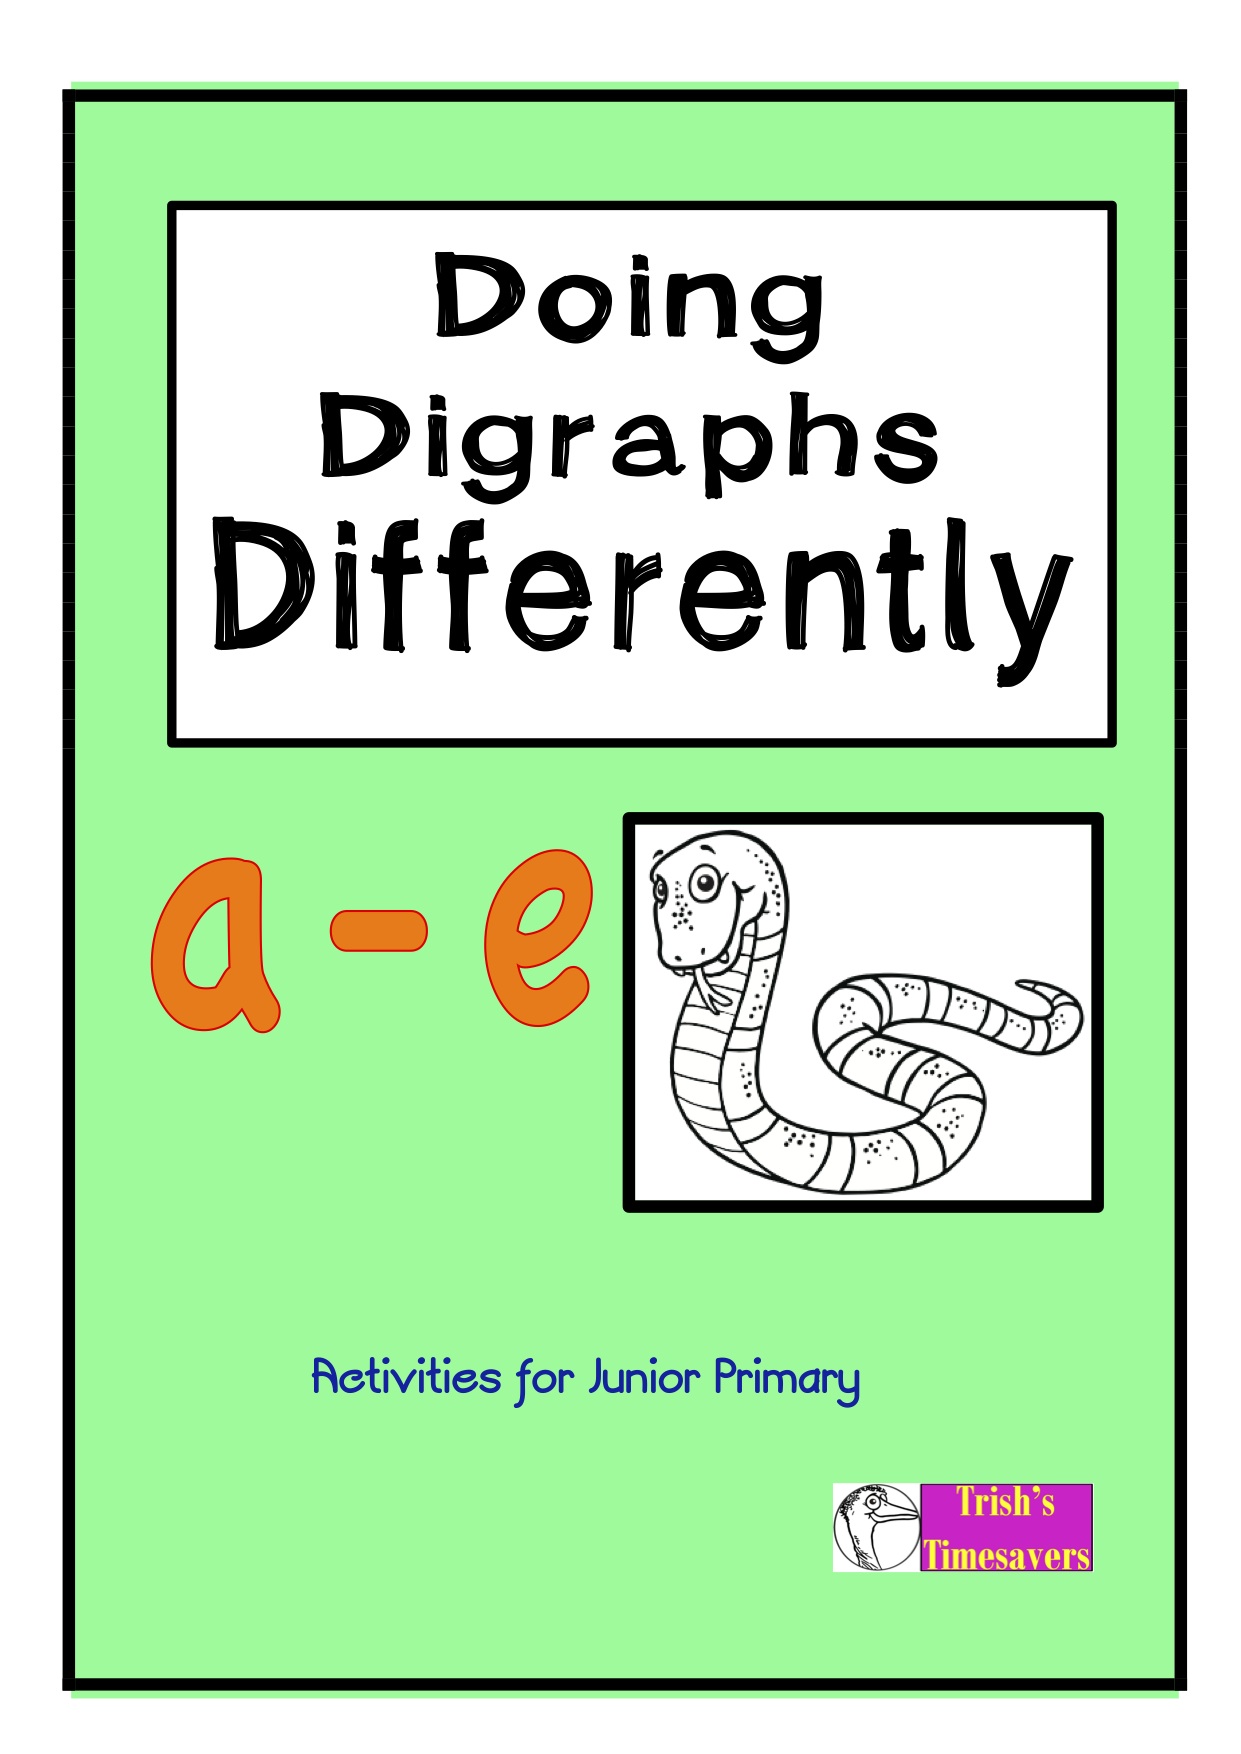 Doing Digraphs Differently a-e